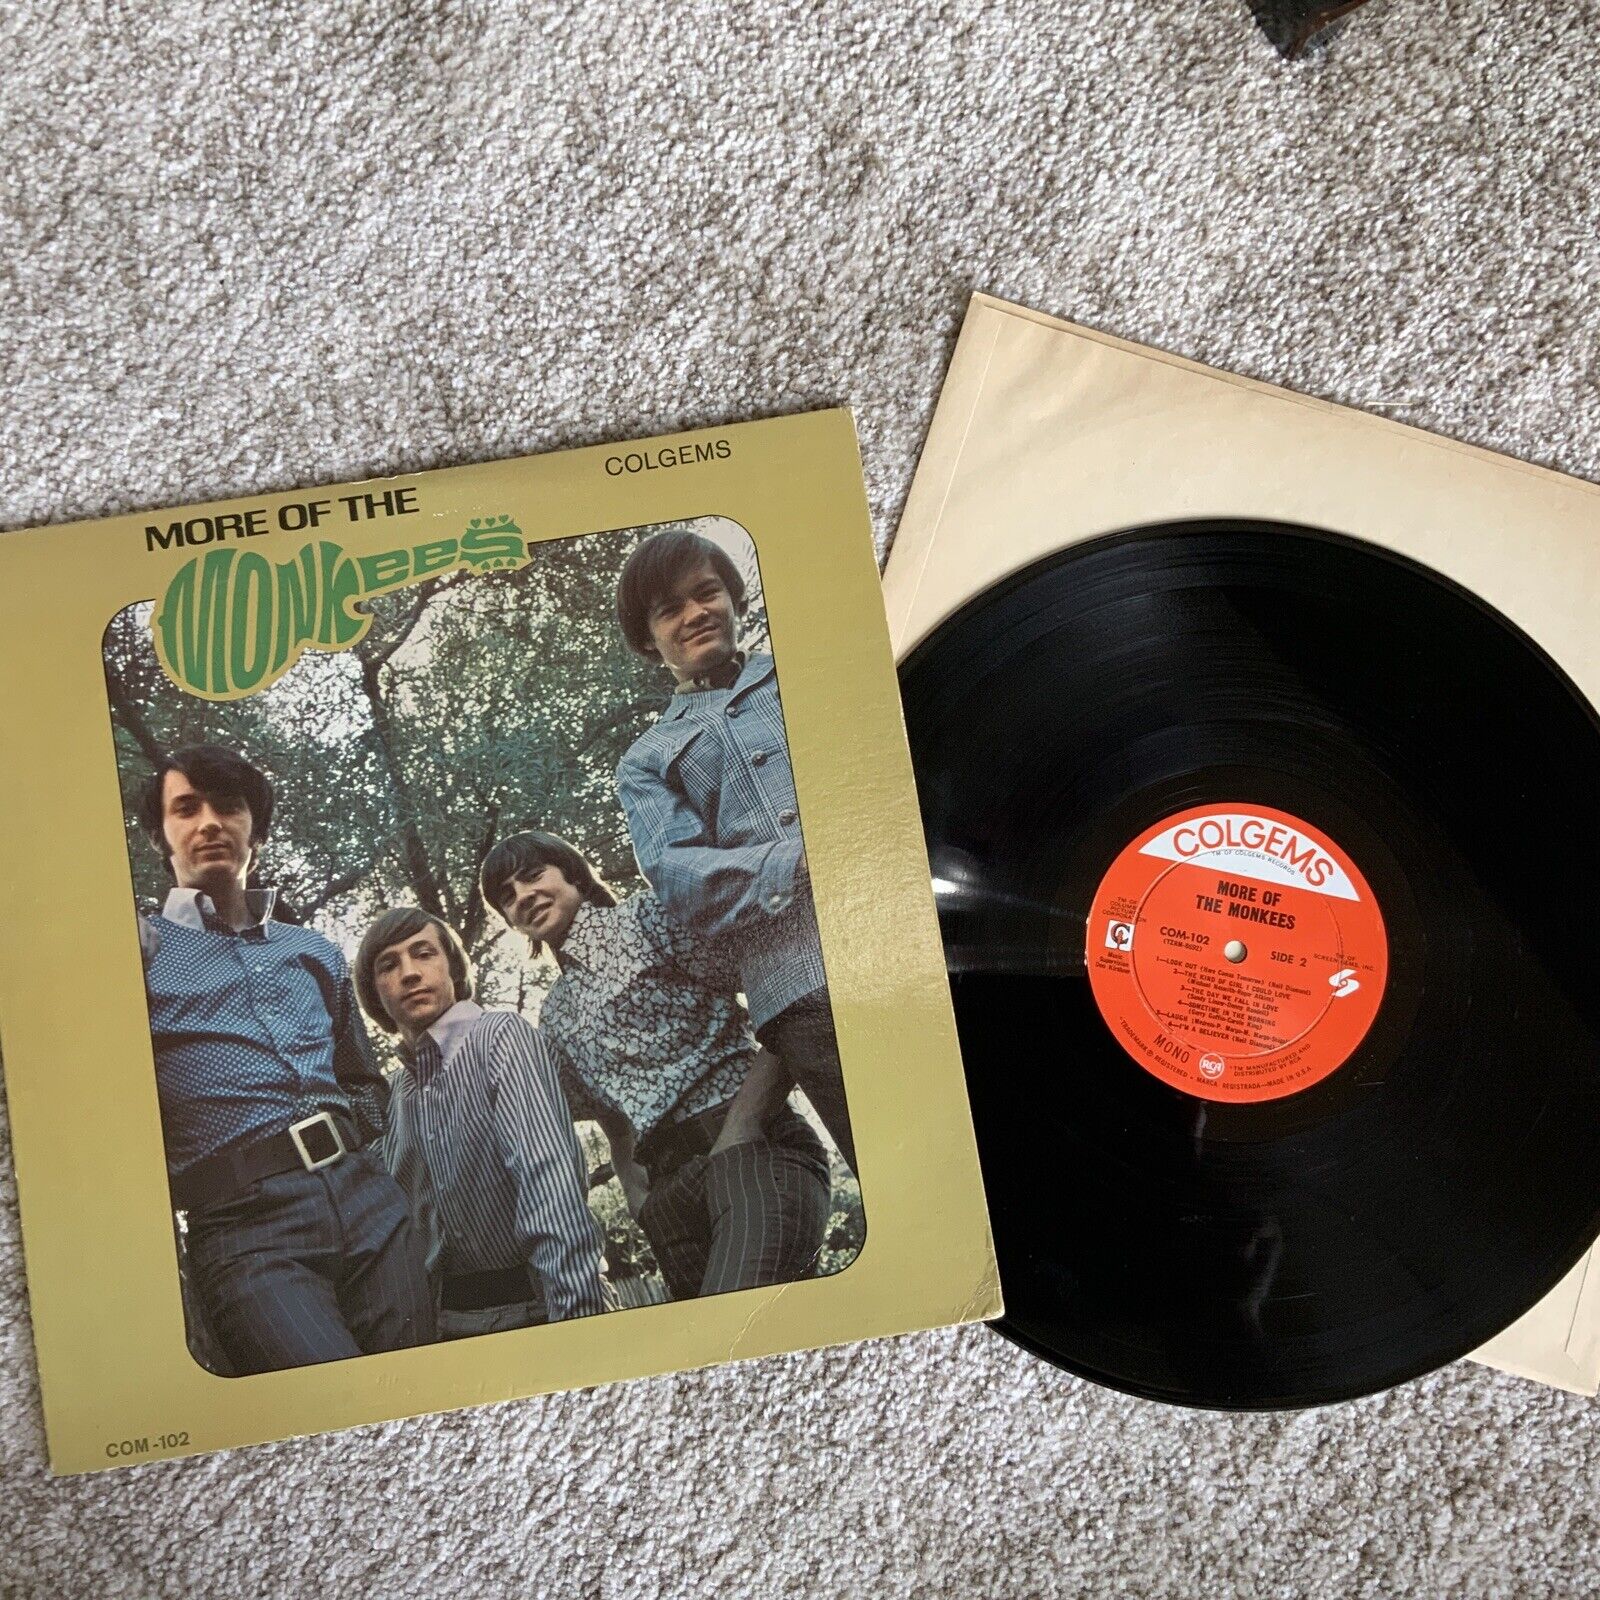 LP ALBUM - MORE OF THE MONKEES - COM-102 GOOD TO VERY GOOD